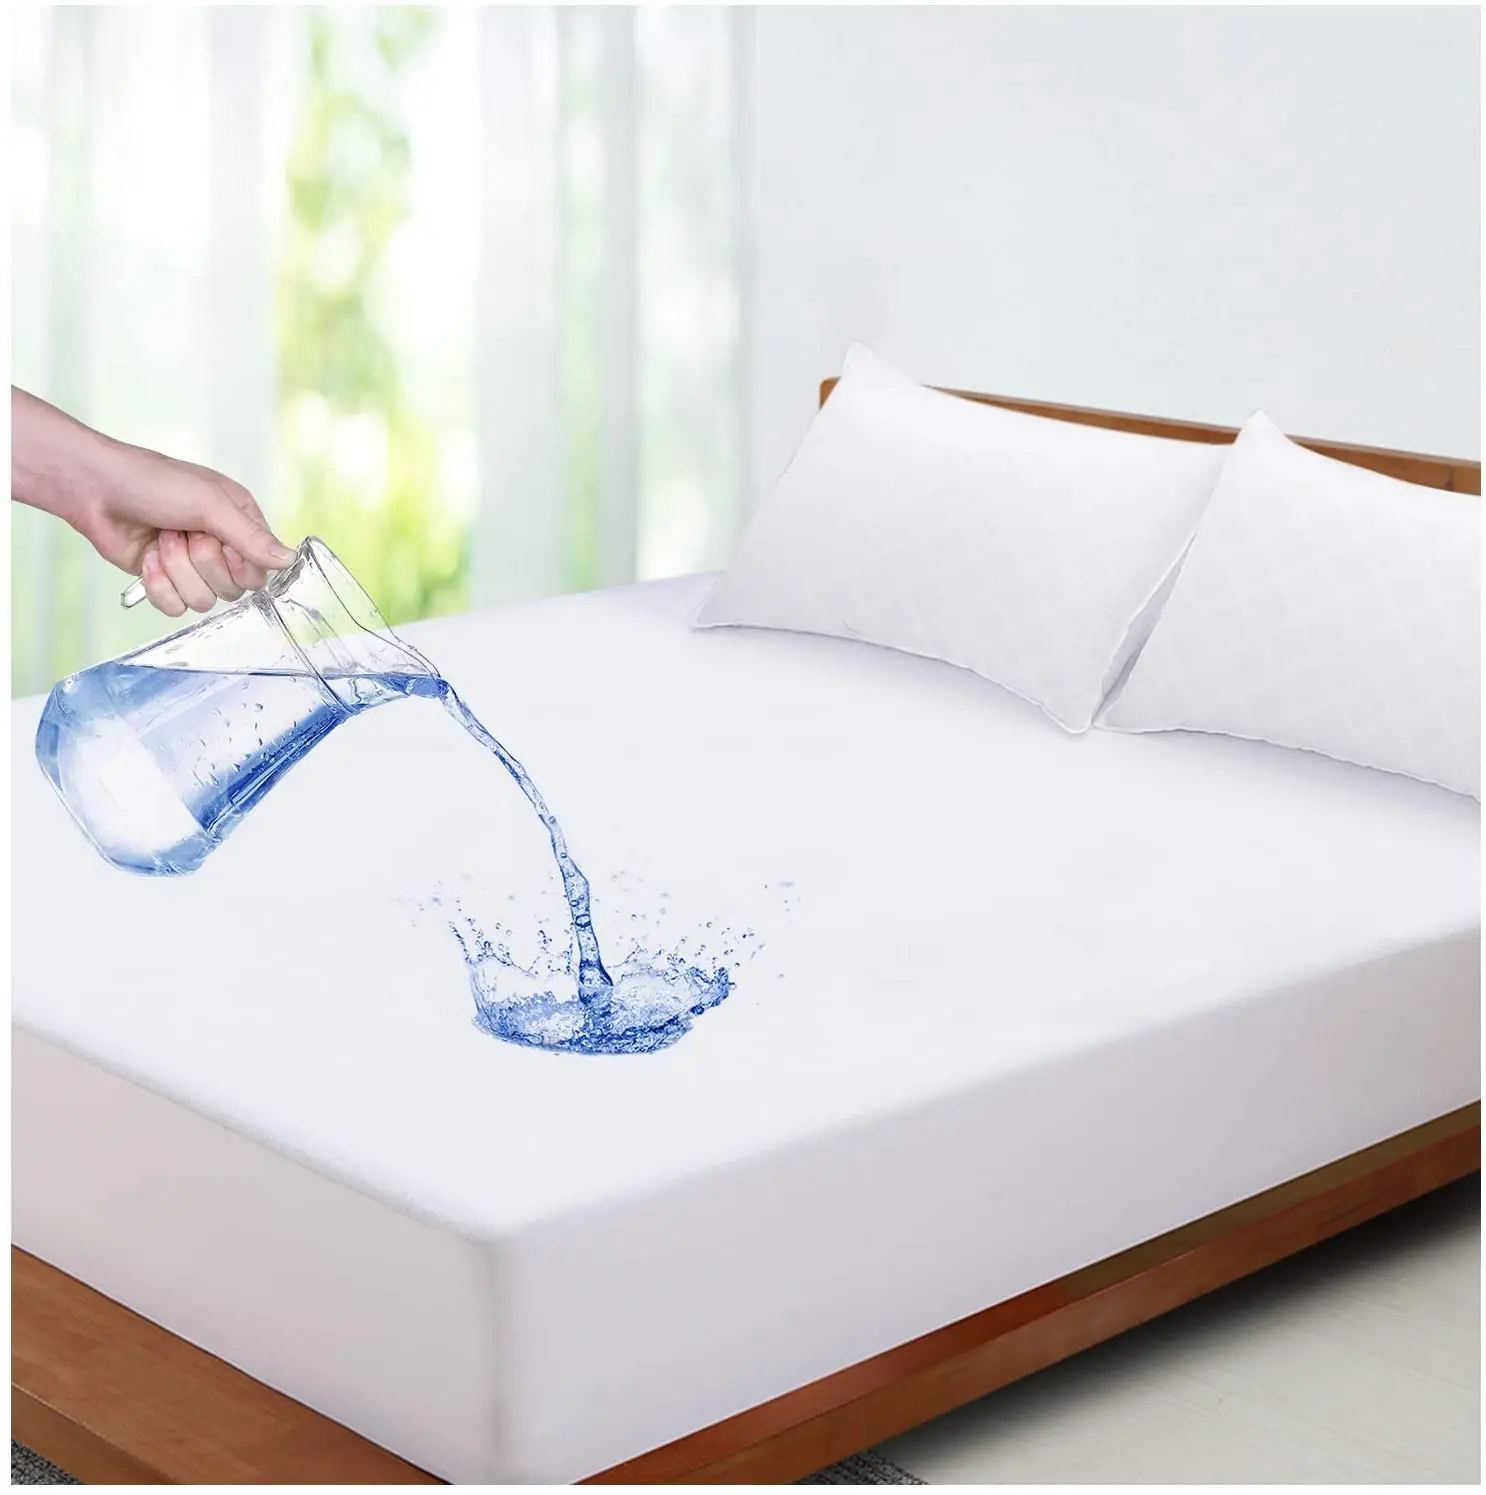 Queen Mattress Protector Fitted Cover Non-Vinyl Terry Cotton Waterproof 